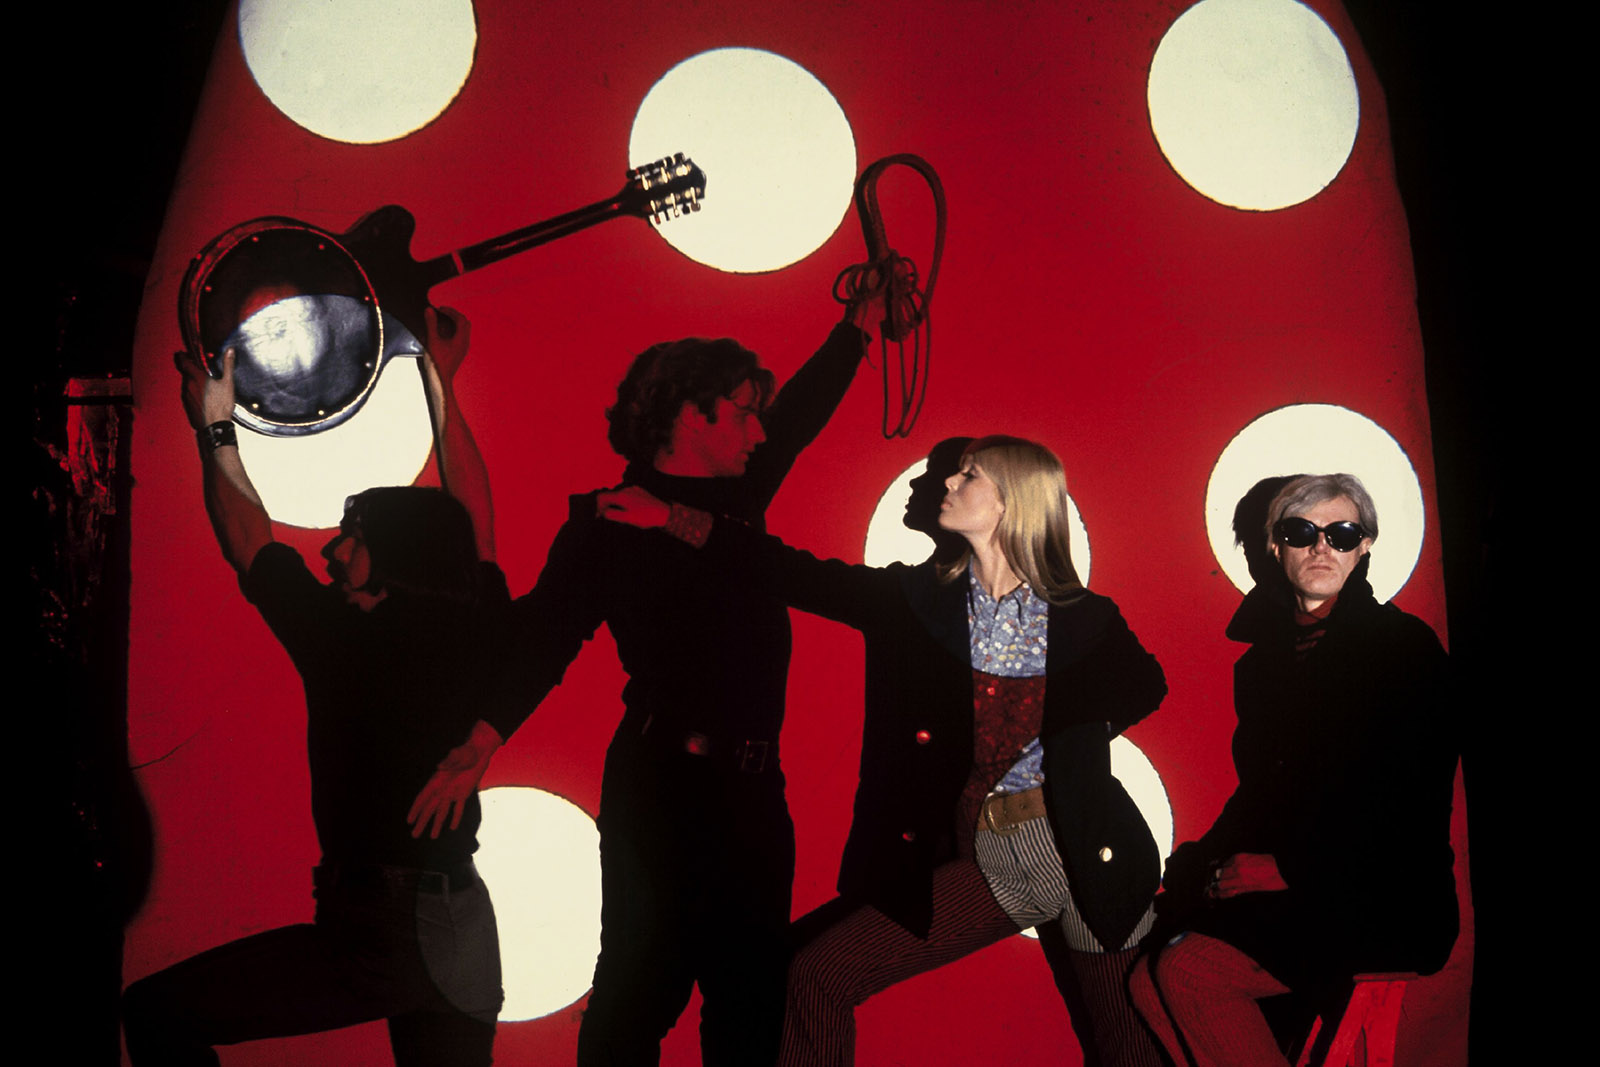 Members of the Velvet Underground John Cale and Nico, with Gerard Malaga and Andy Warhol, in New York City, circa 1966